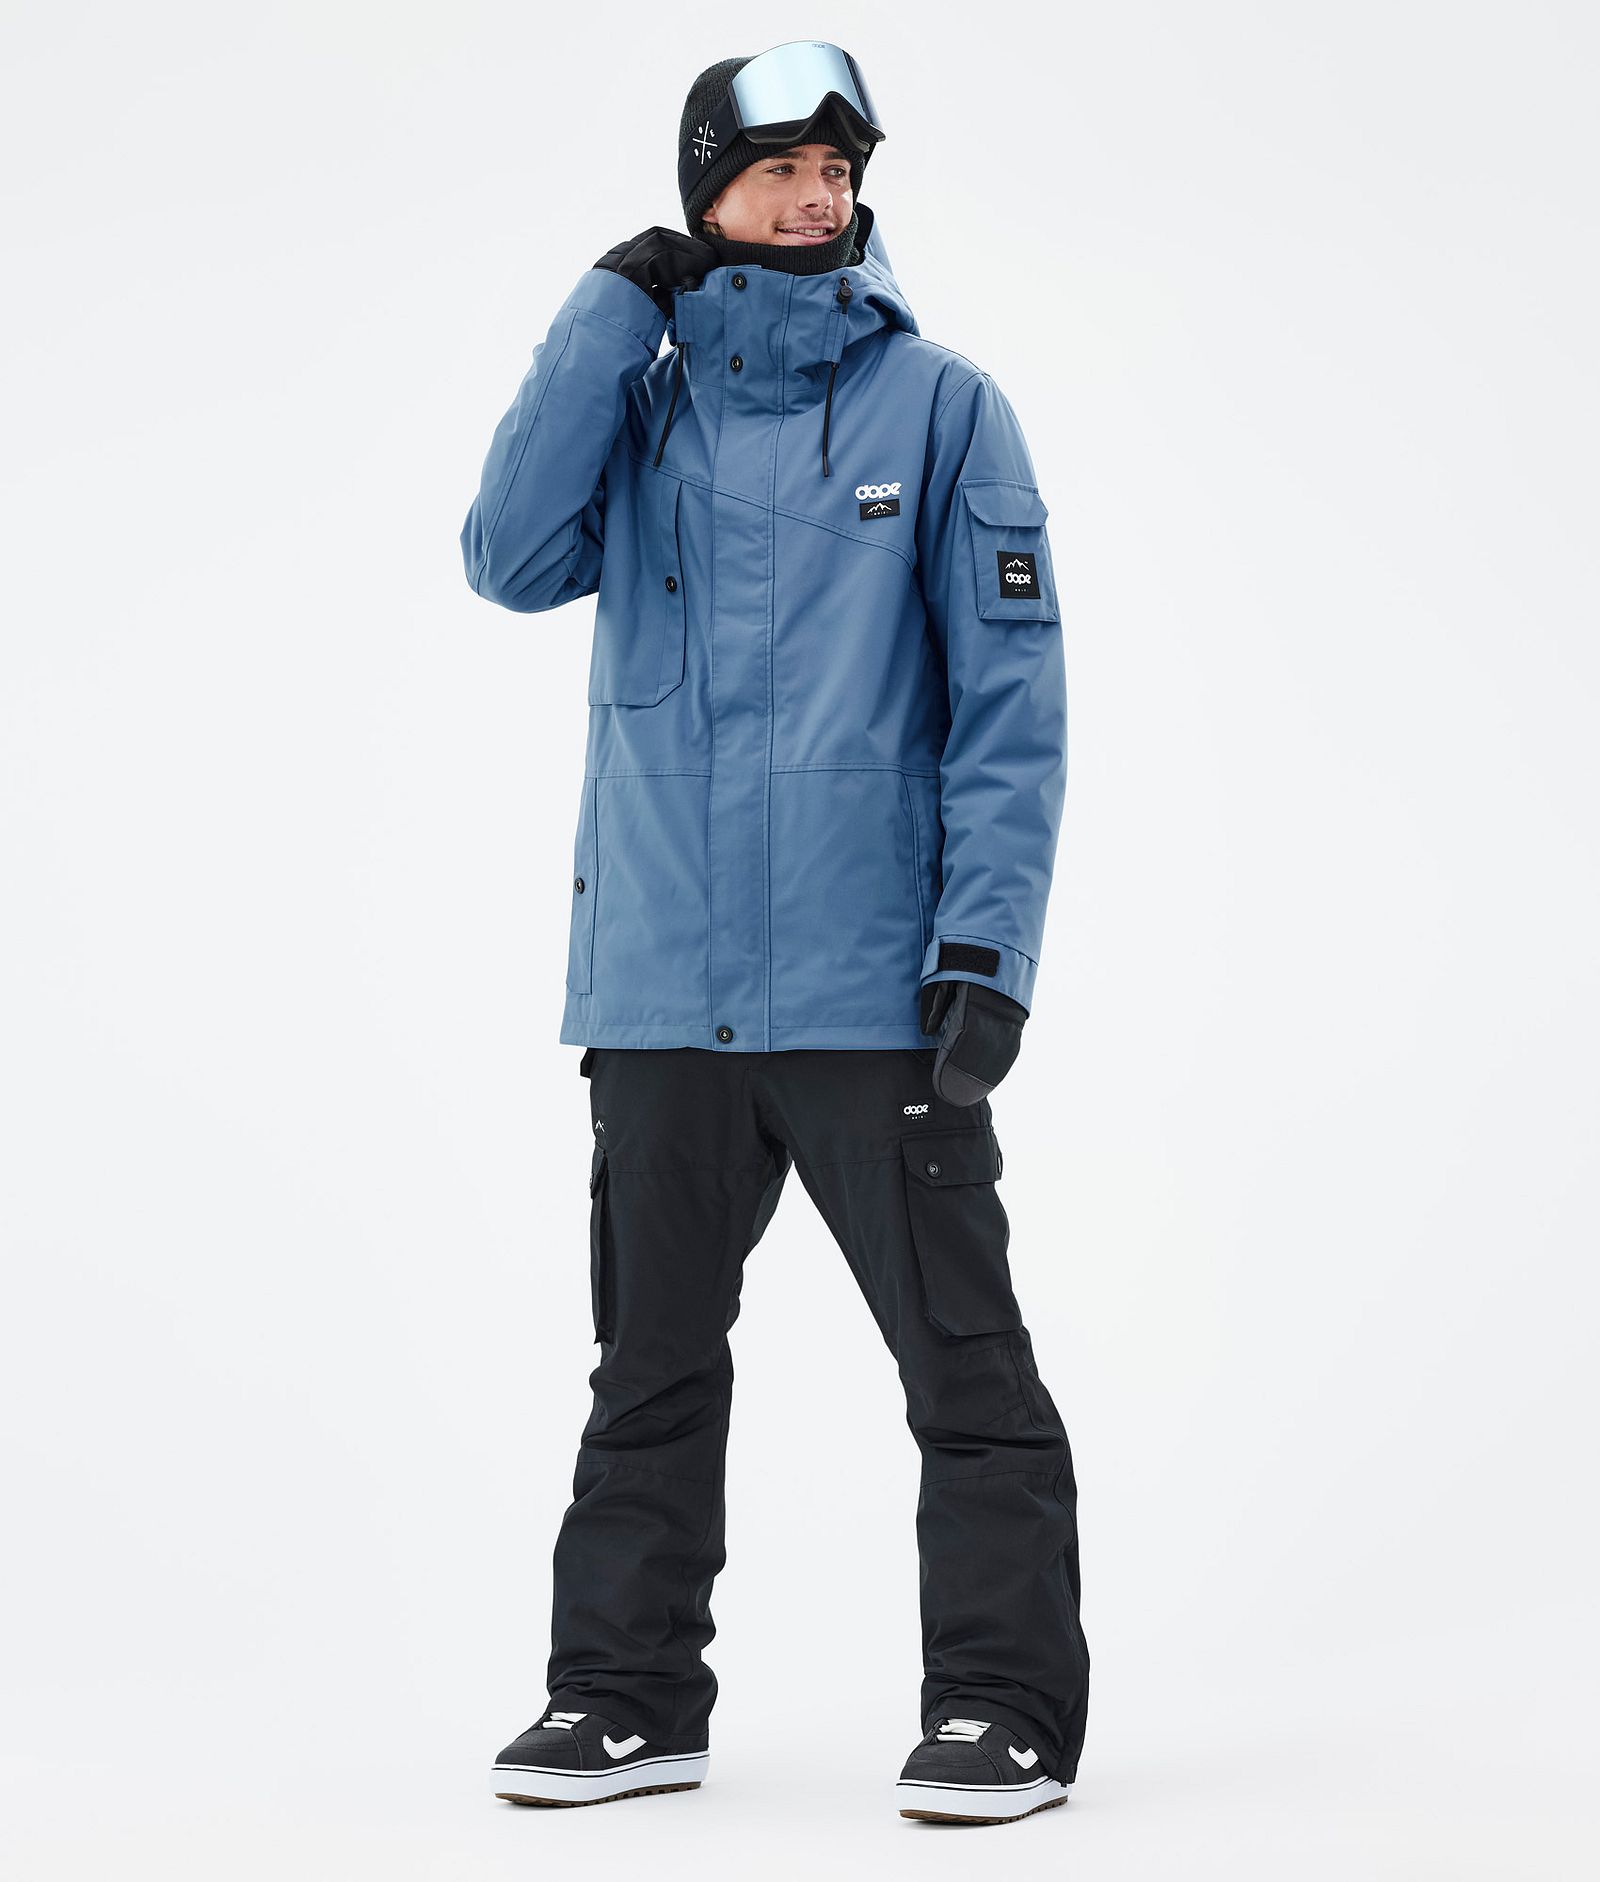 Adept Giacca Snowboard Uomo Blue Steel